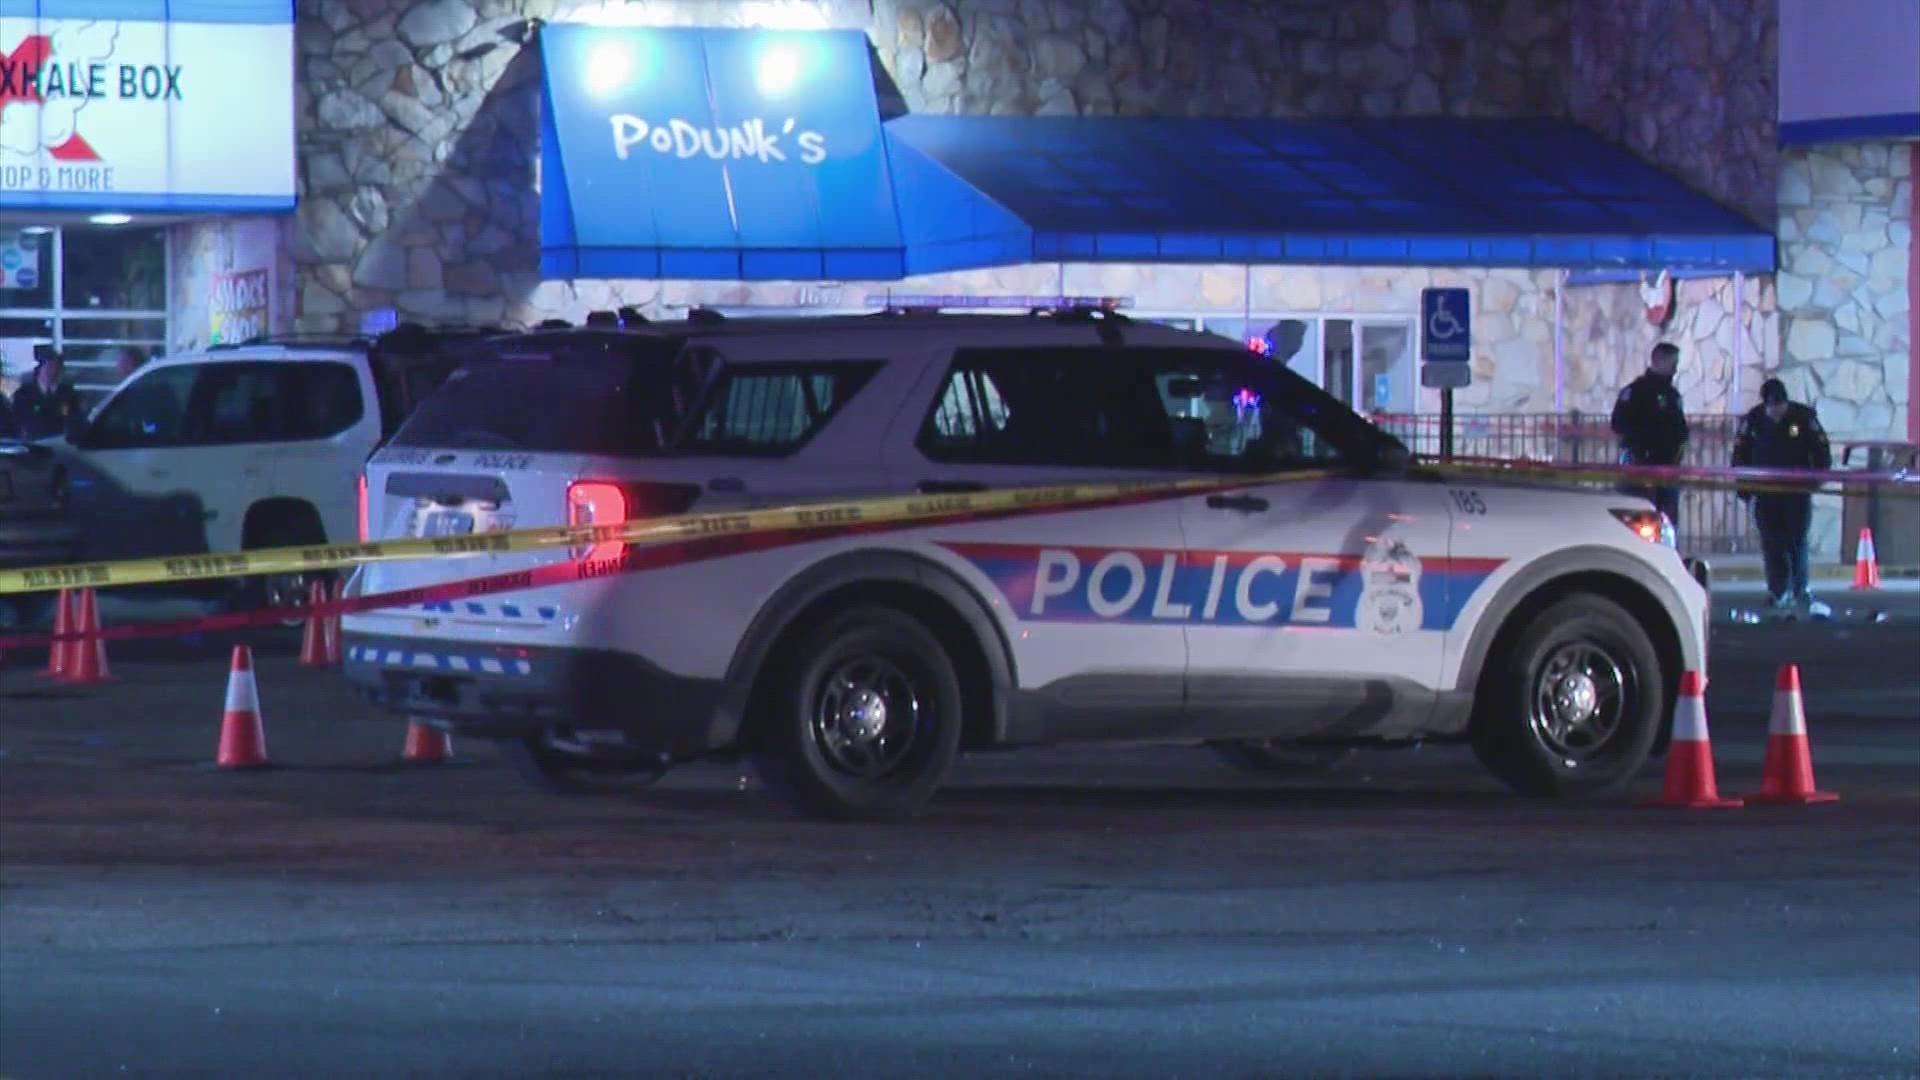 Mareo Bell, 33, was one of three people shot outside Podunk’s bar on 1644 East Dublin-Granville Road on March 11.